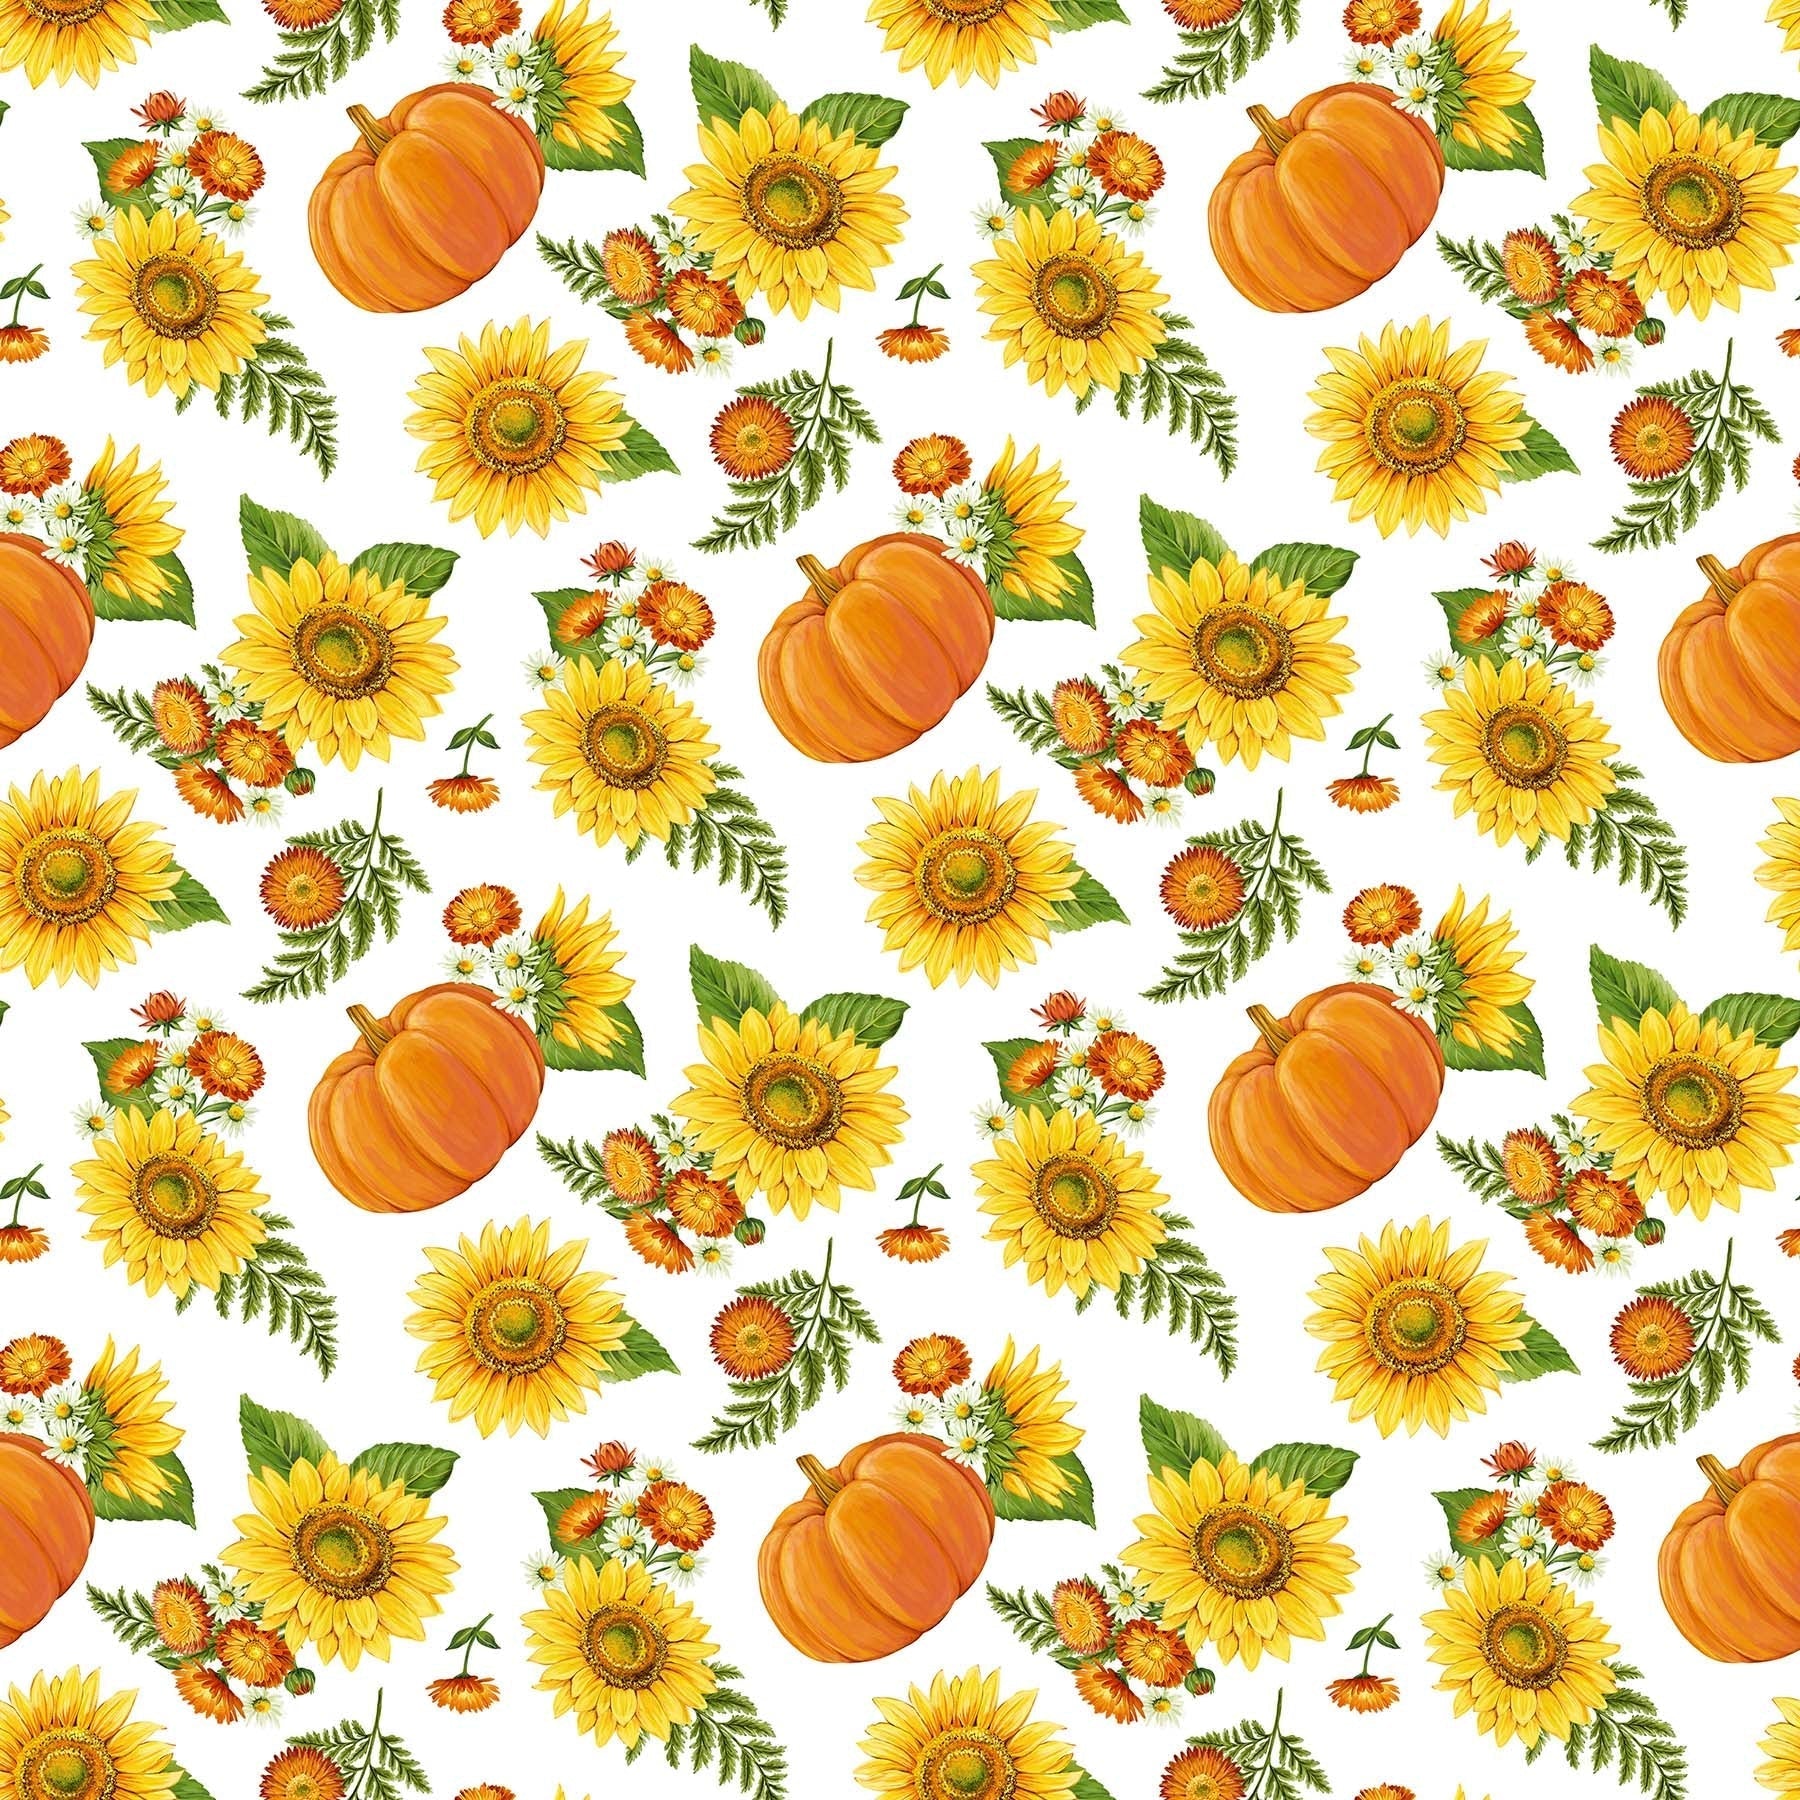 Northcott Fabric by the Yard FQ (18" x 21") Sunshine Harvest Tossed Pumpkins and Sunflowers on a white background Floral Cotton 25457-10